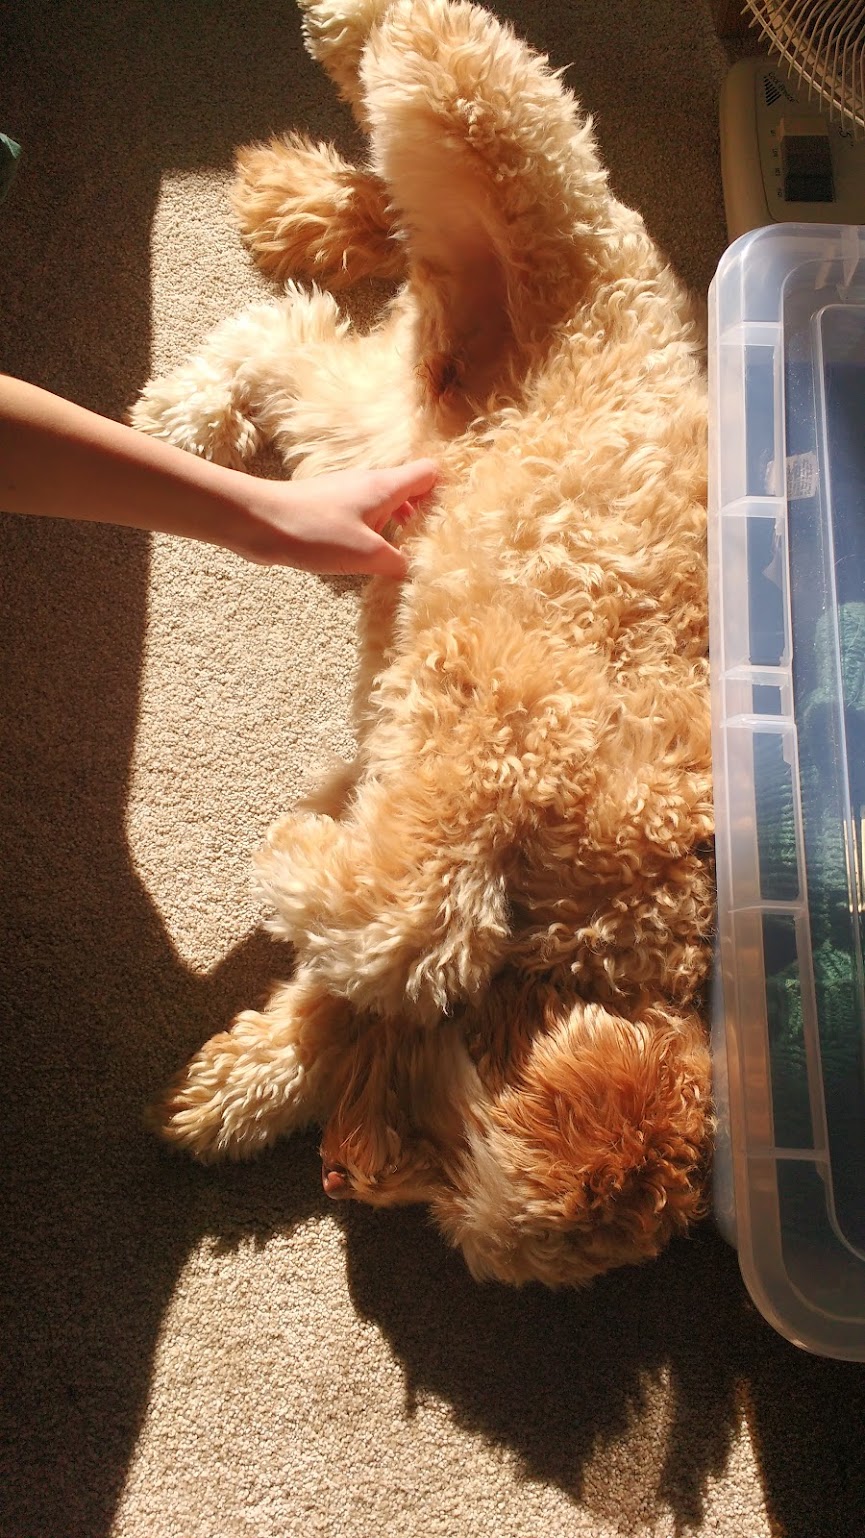 Hachi lying in a patch of sunlight looking ethereally golden.